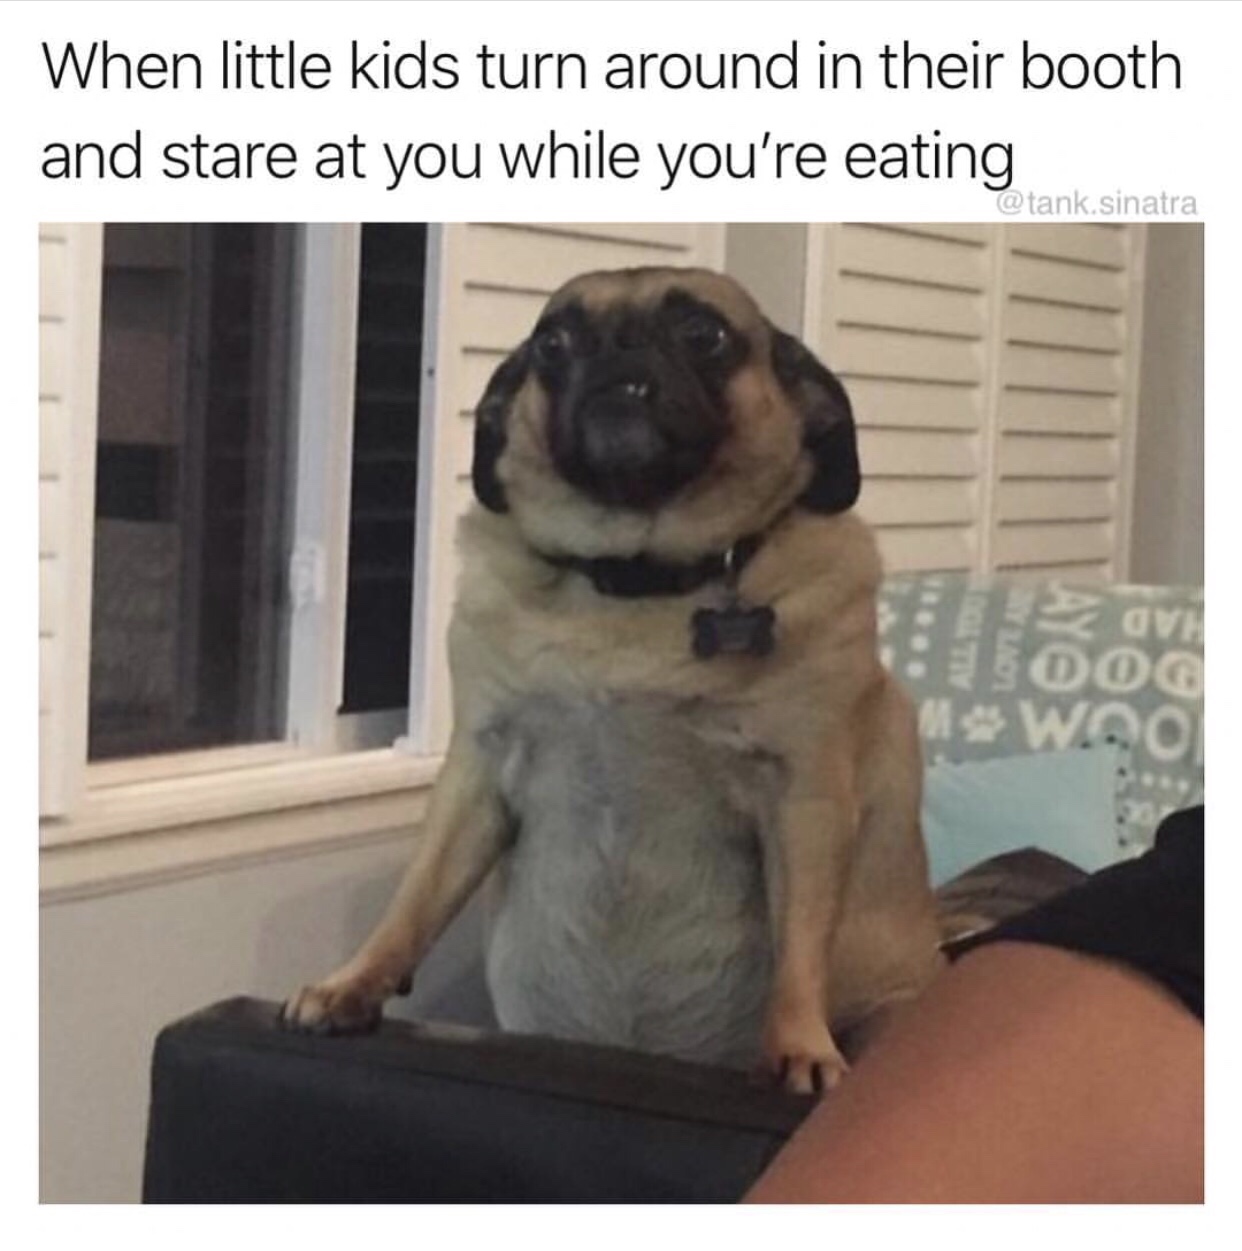 meme little kid stares at you - When little kids turn around in their booth and stare at you while you're eating .sinatra O Dog wod